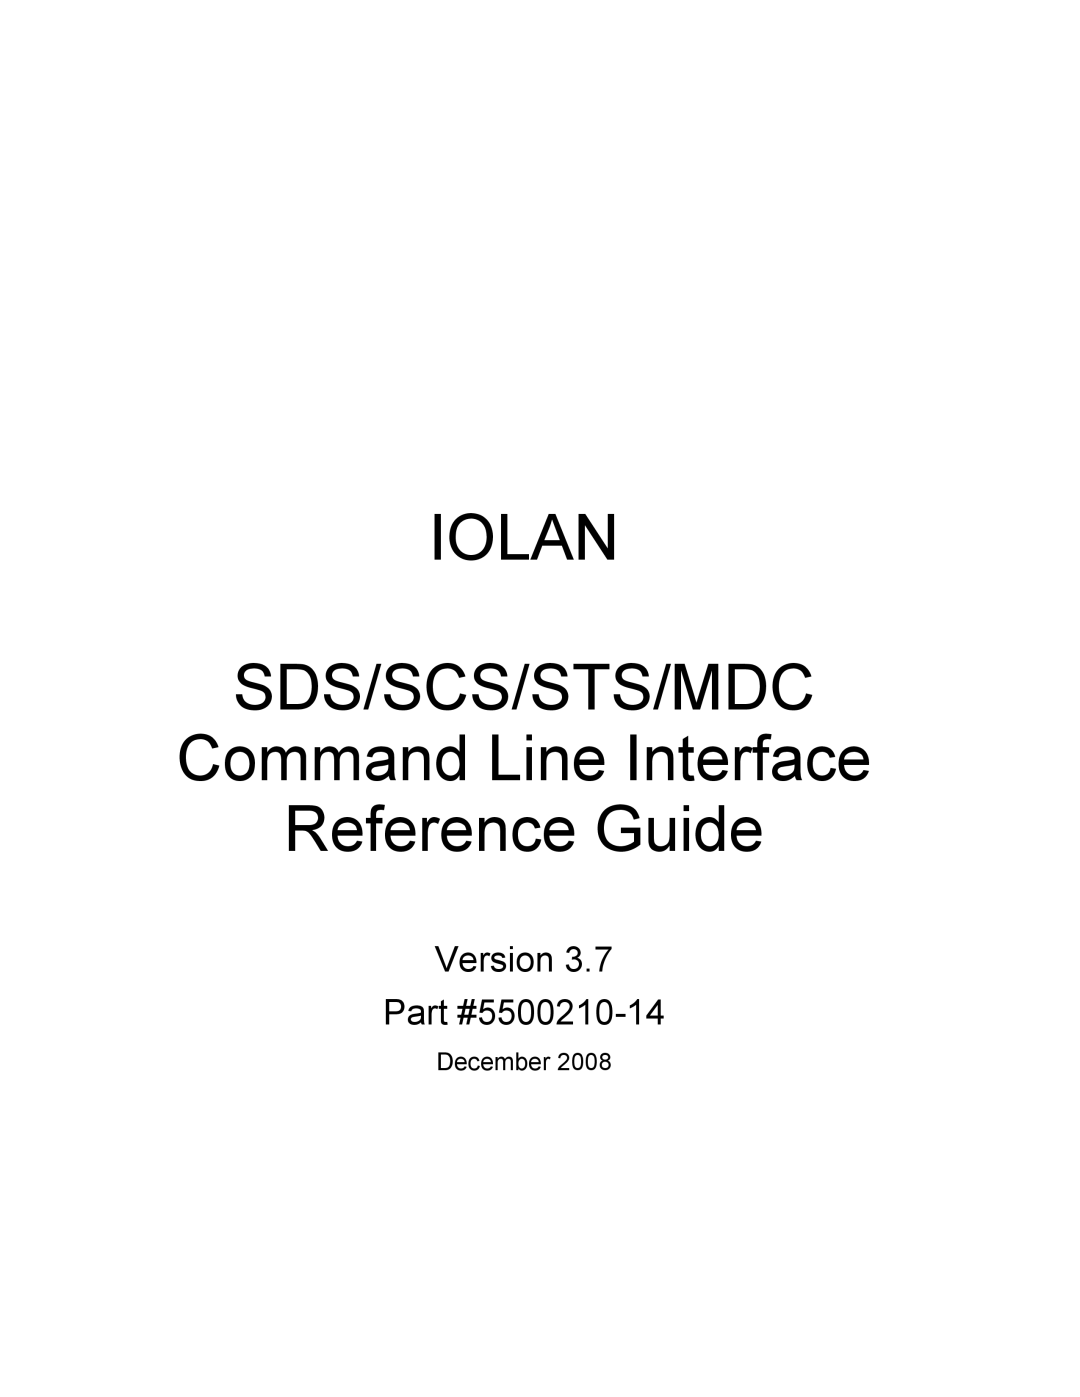 Perle Systems manual Iolan SDS/SCS/STS/MDC 